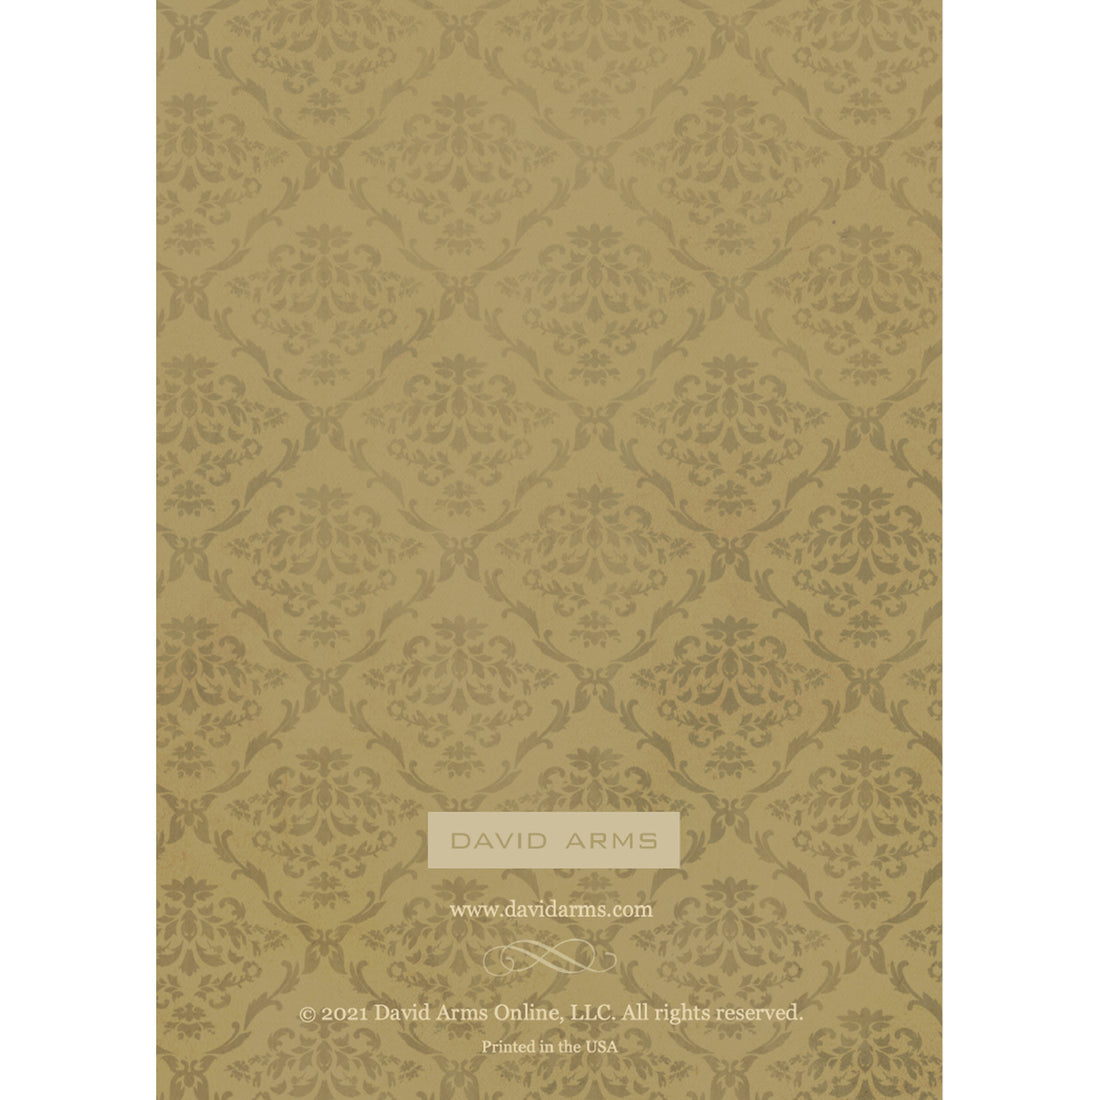 The back side of the greeting card, featuring a gold damask pattern on a brown background, created by David Arms.